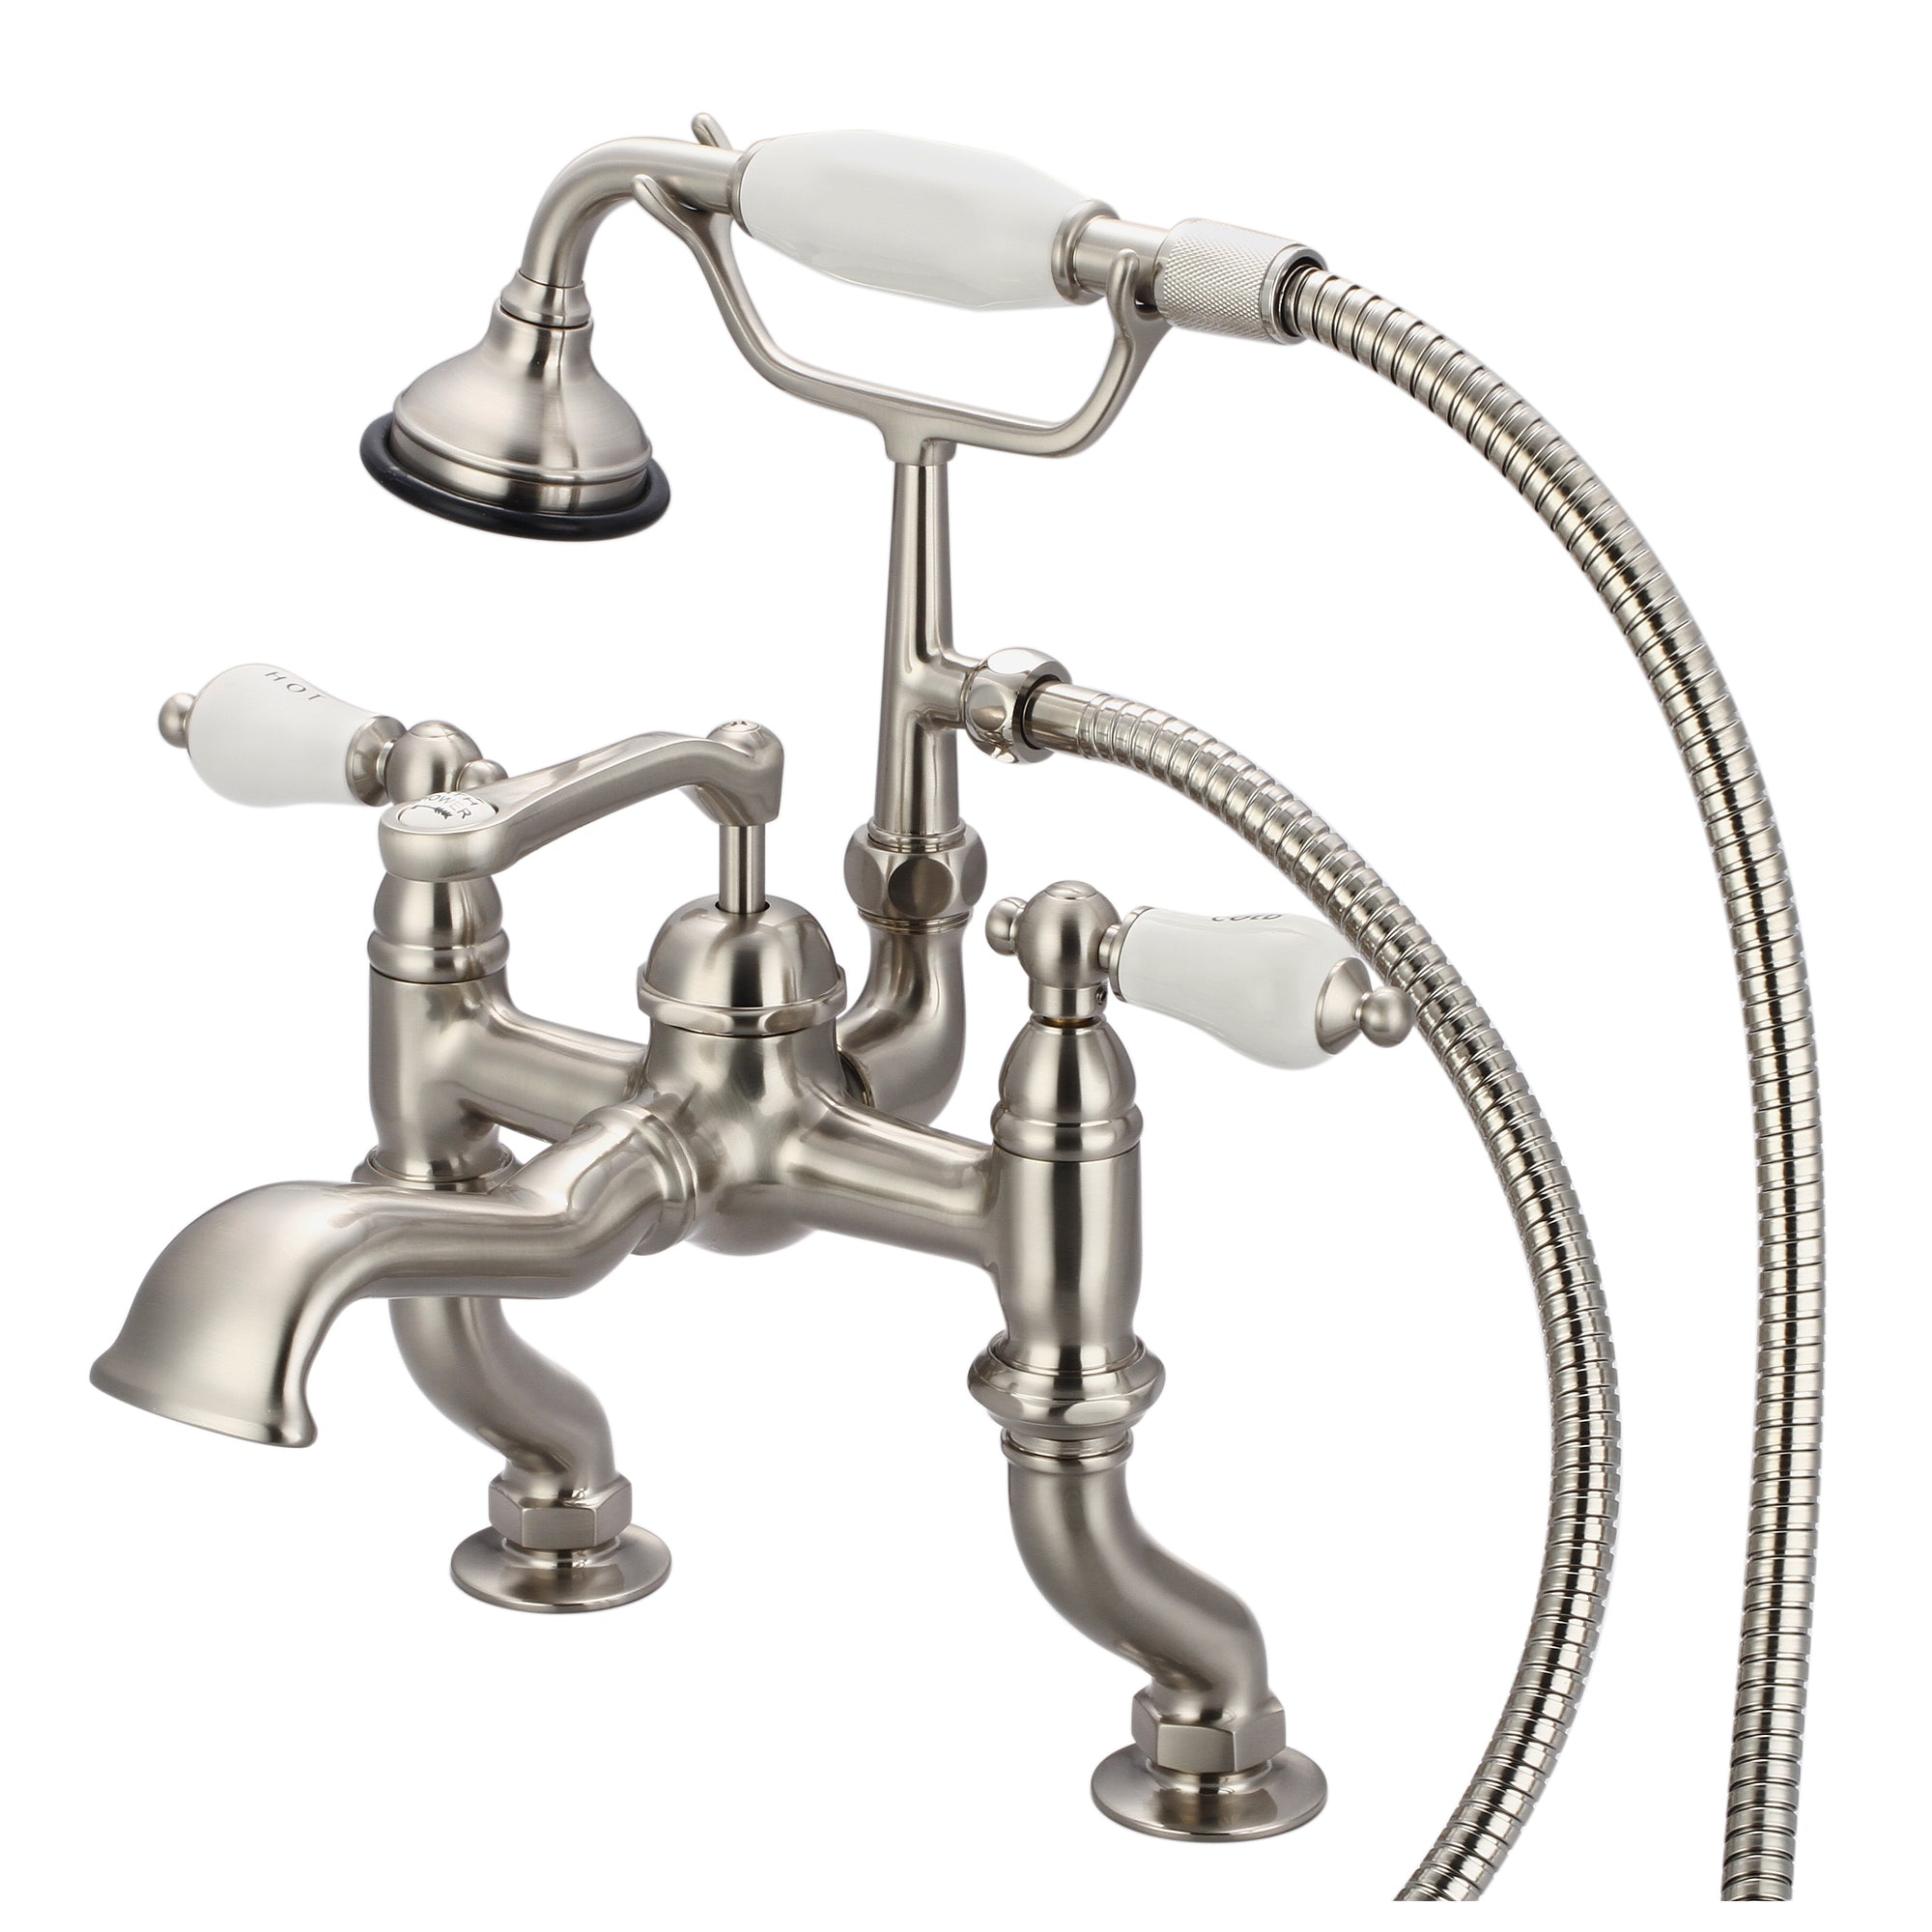 Water Creation | Vintage Classic Adjustable Center Deck Mount Tub Faucet With Handheld Shower in Brushed Nickel Finish With Porcelain Lever Handles, Hot And Cold Labels Included | F6-0004-02-CL